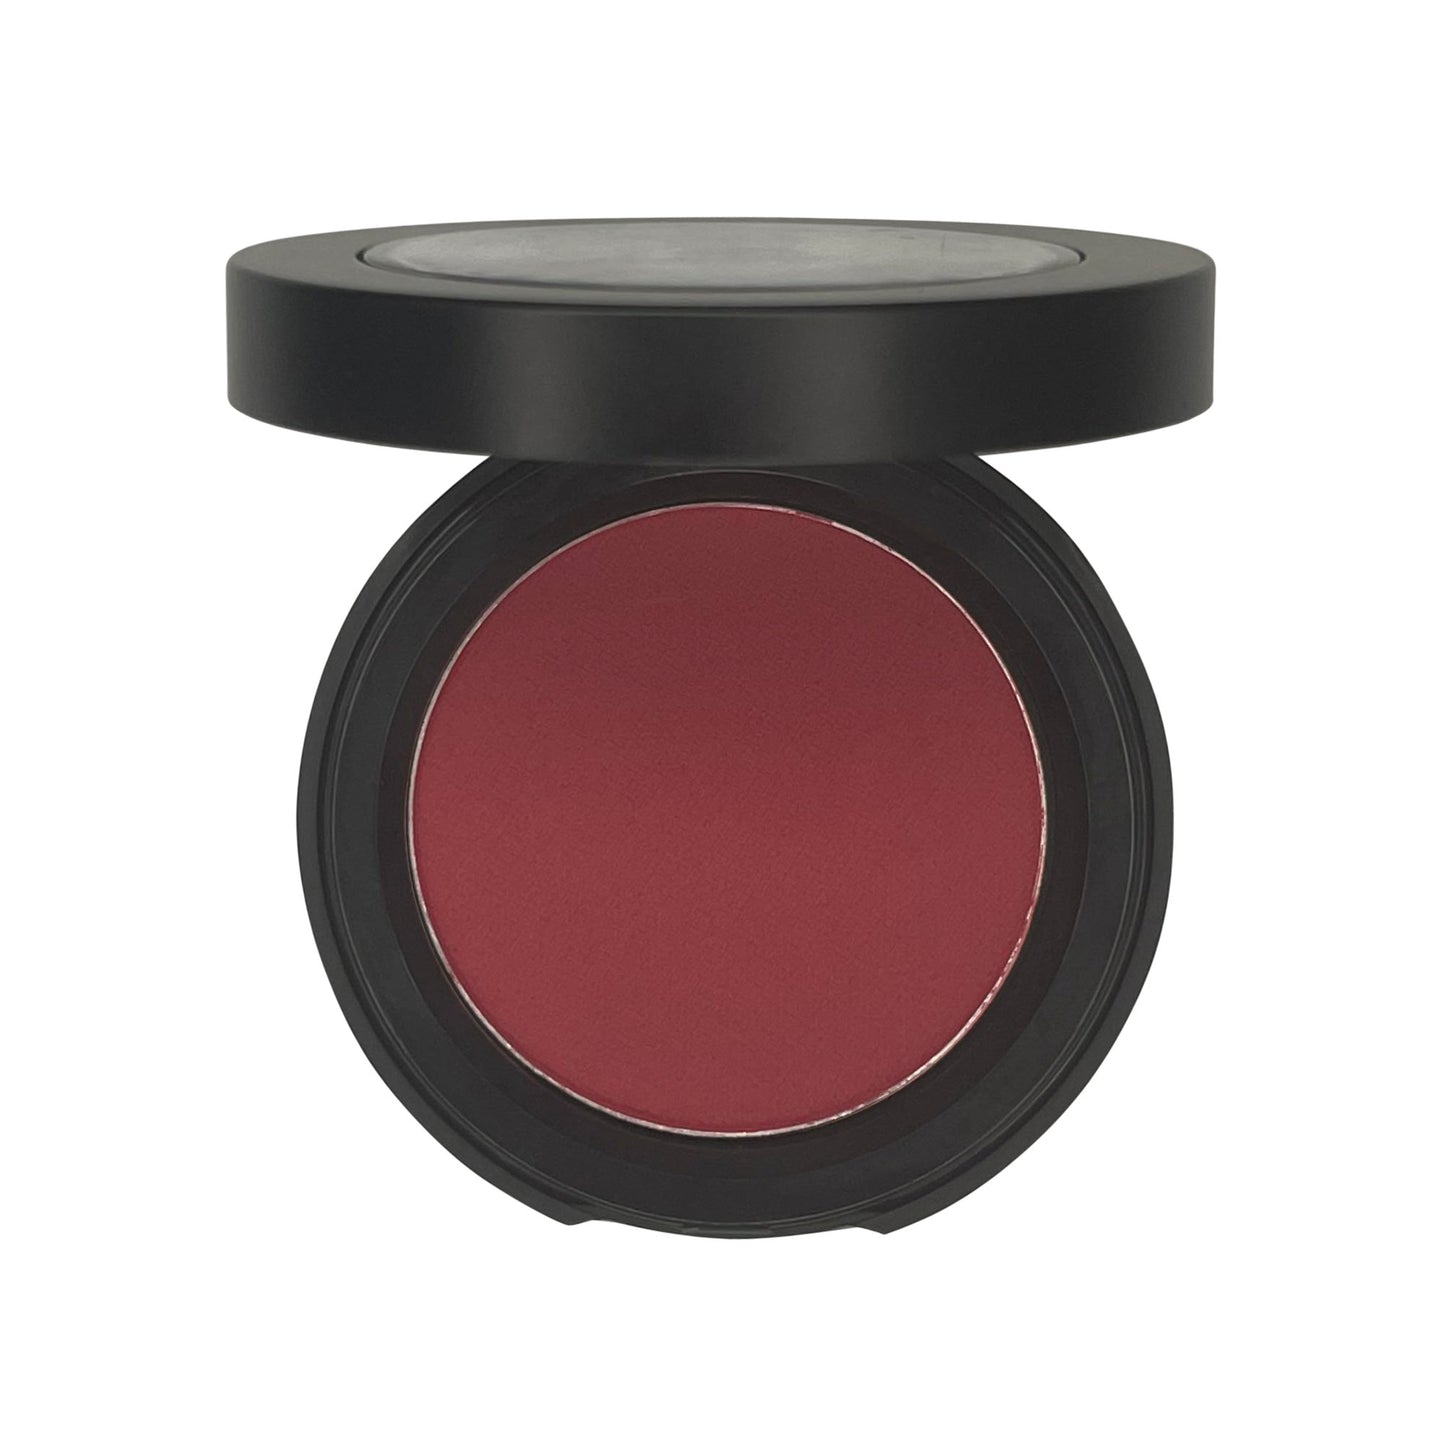 Cruisin Organics' Rasberry Single Pan Blush. Formulated without talc, this soft pressed powder effortlessly blends for a flawless finish. Add a refreshing pop of color to your cheeks with ease.